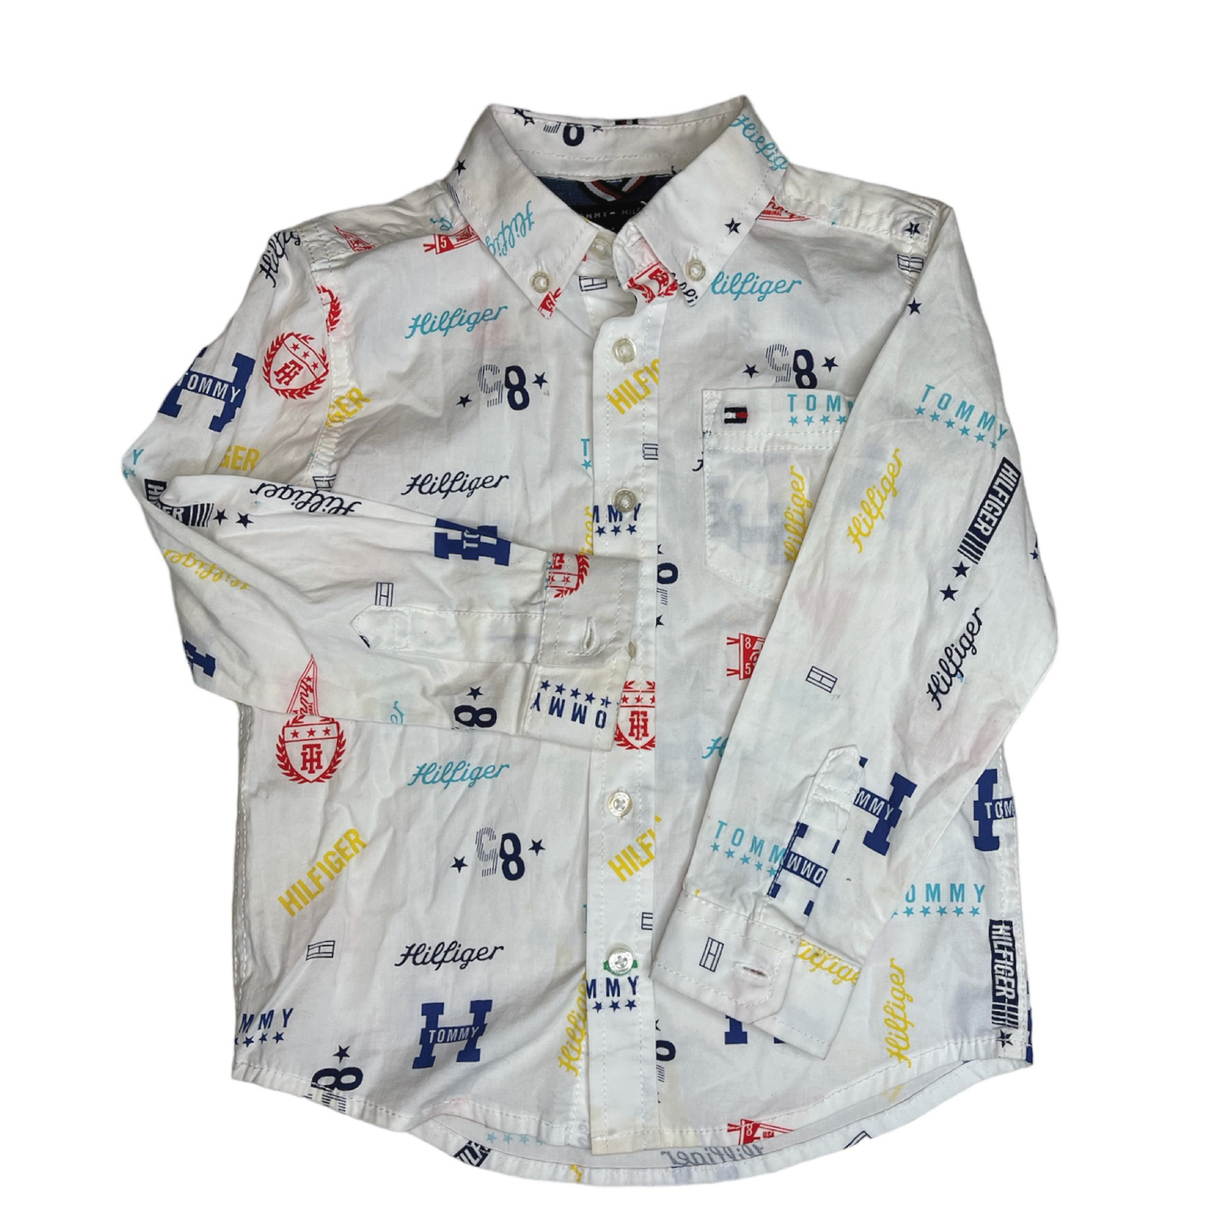 A Second Chance - Tommy Hilfiger 3Y Shirt kids - Delivery All Over Lebanon